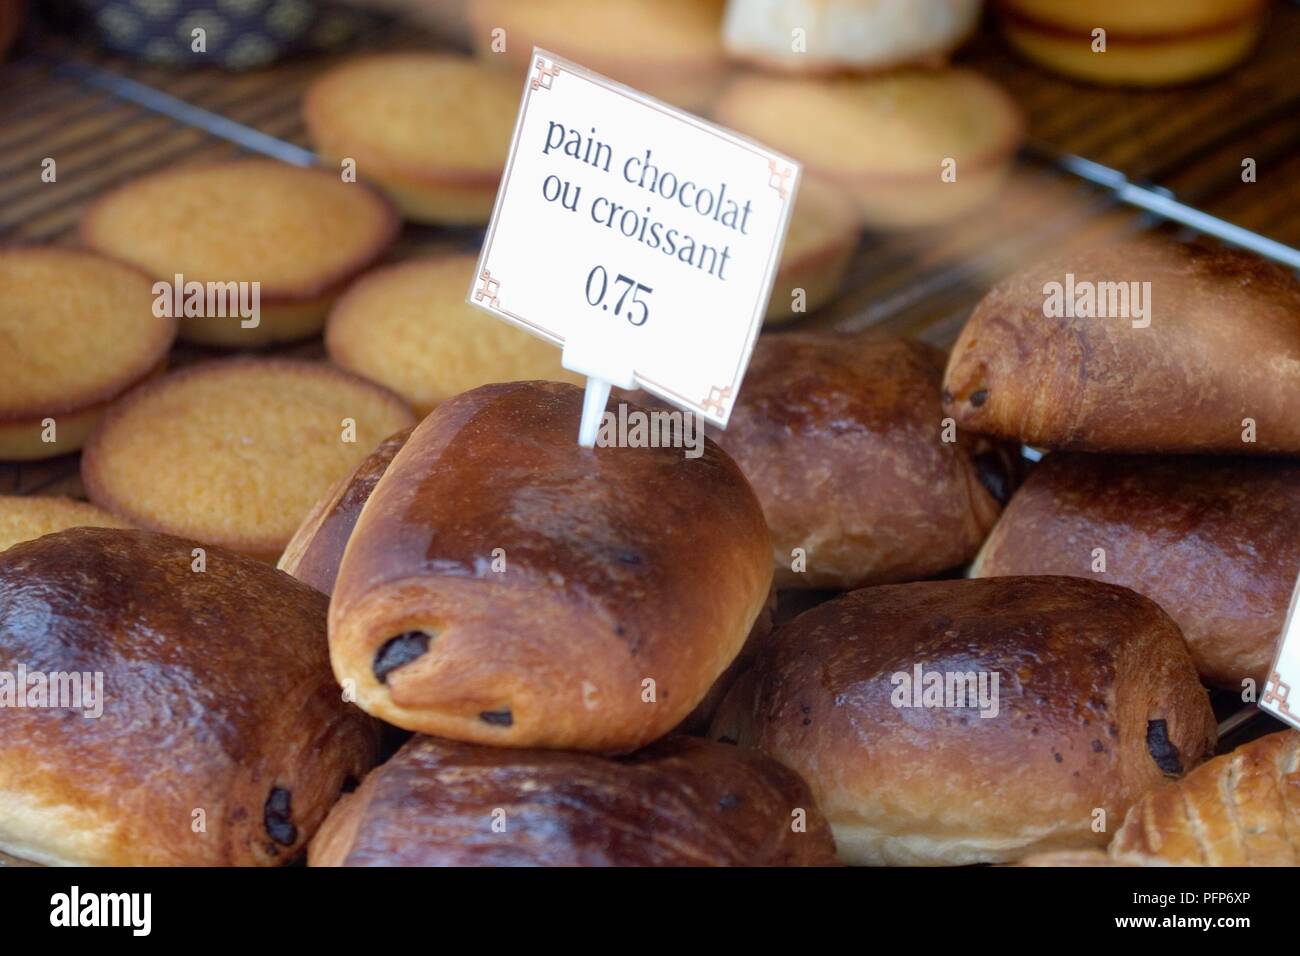 Price tag on fresh pain au chocolat ou croissant in French